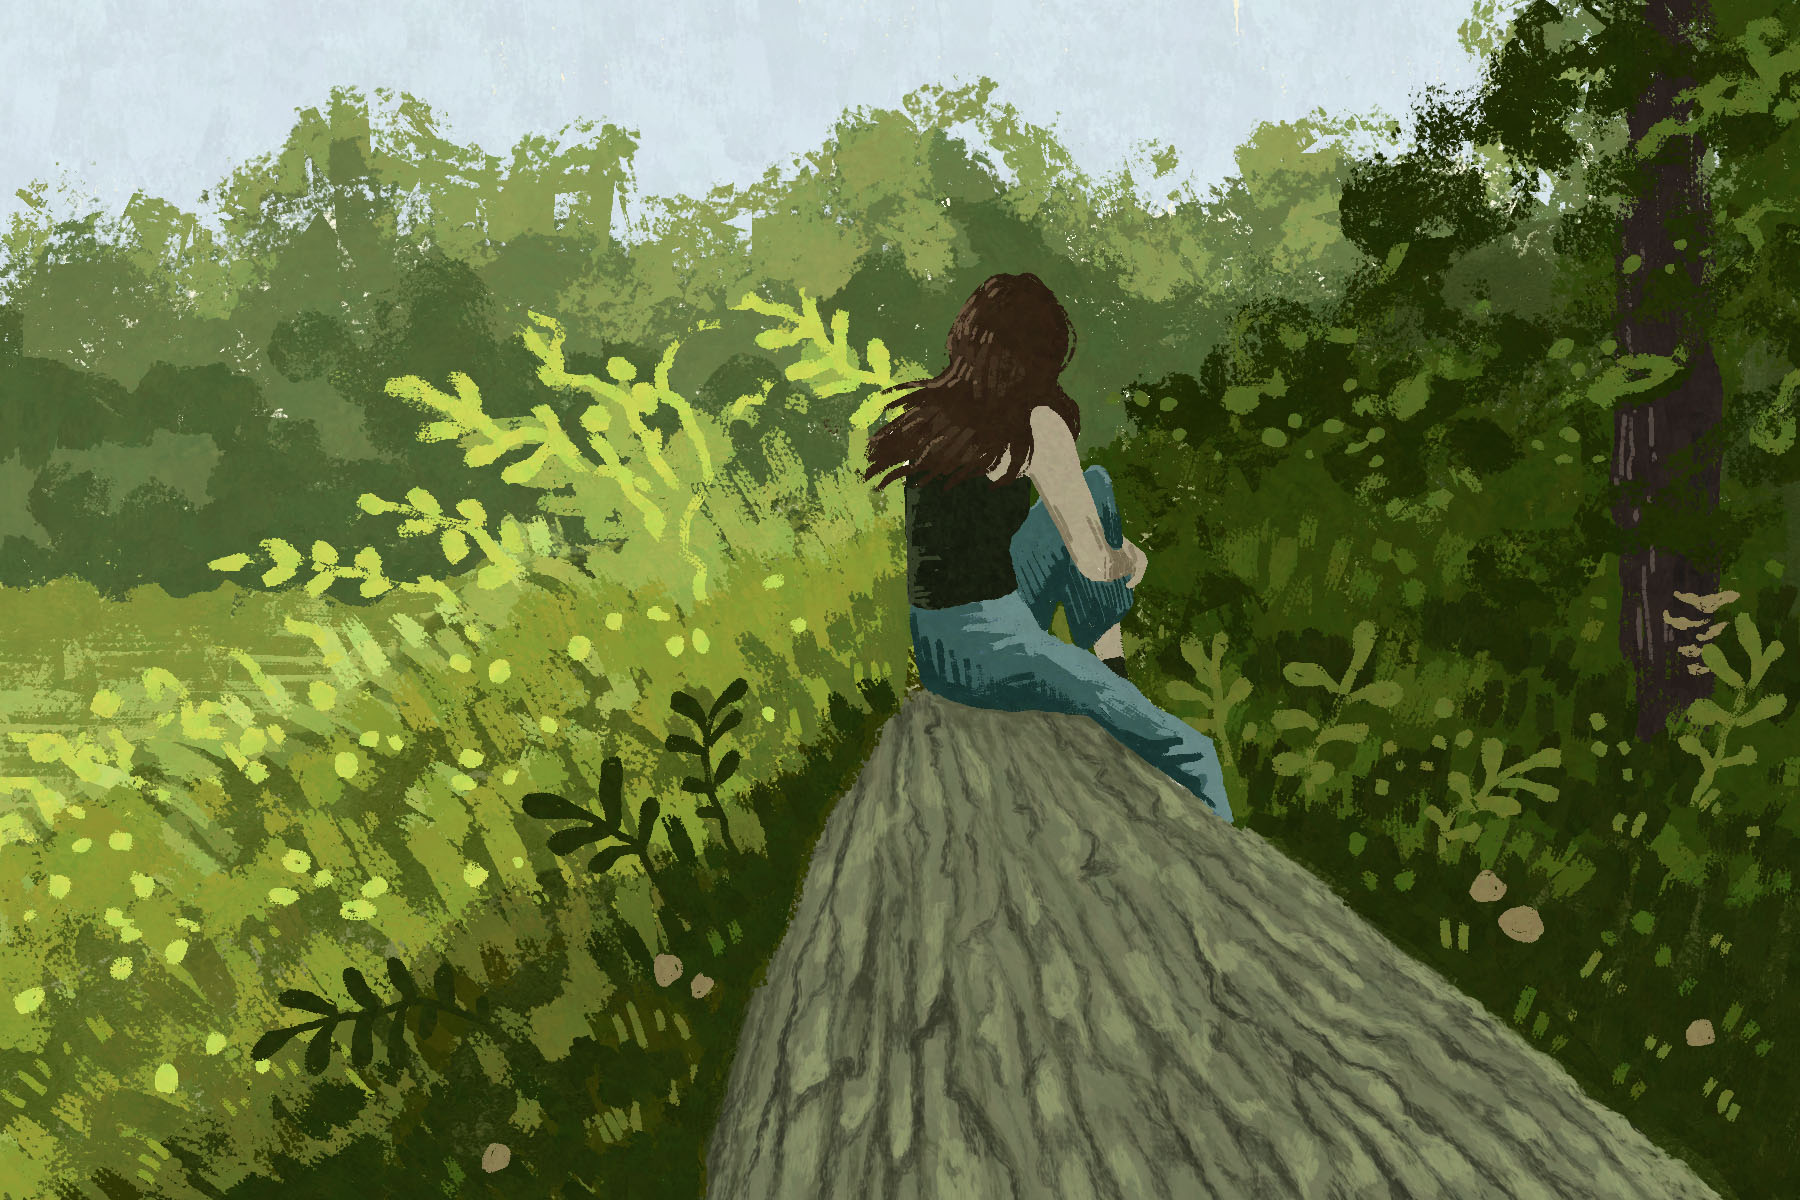 In an article about reconnecting with nature a girl with brown hair sits sits on a log among trees and other greenery.